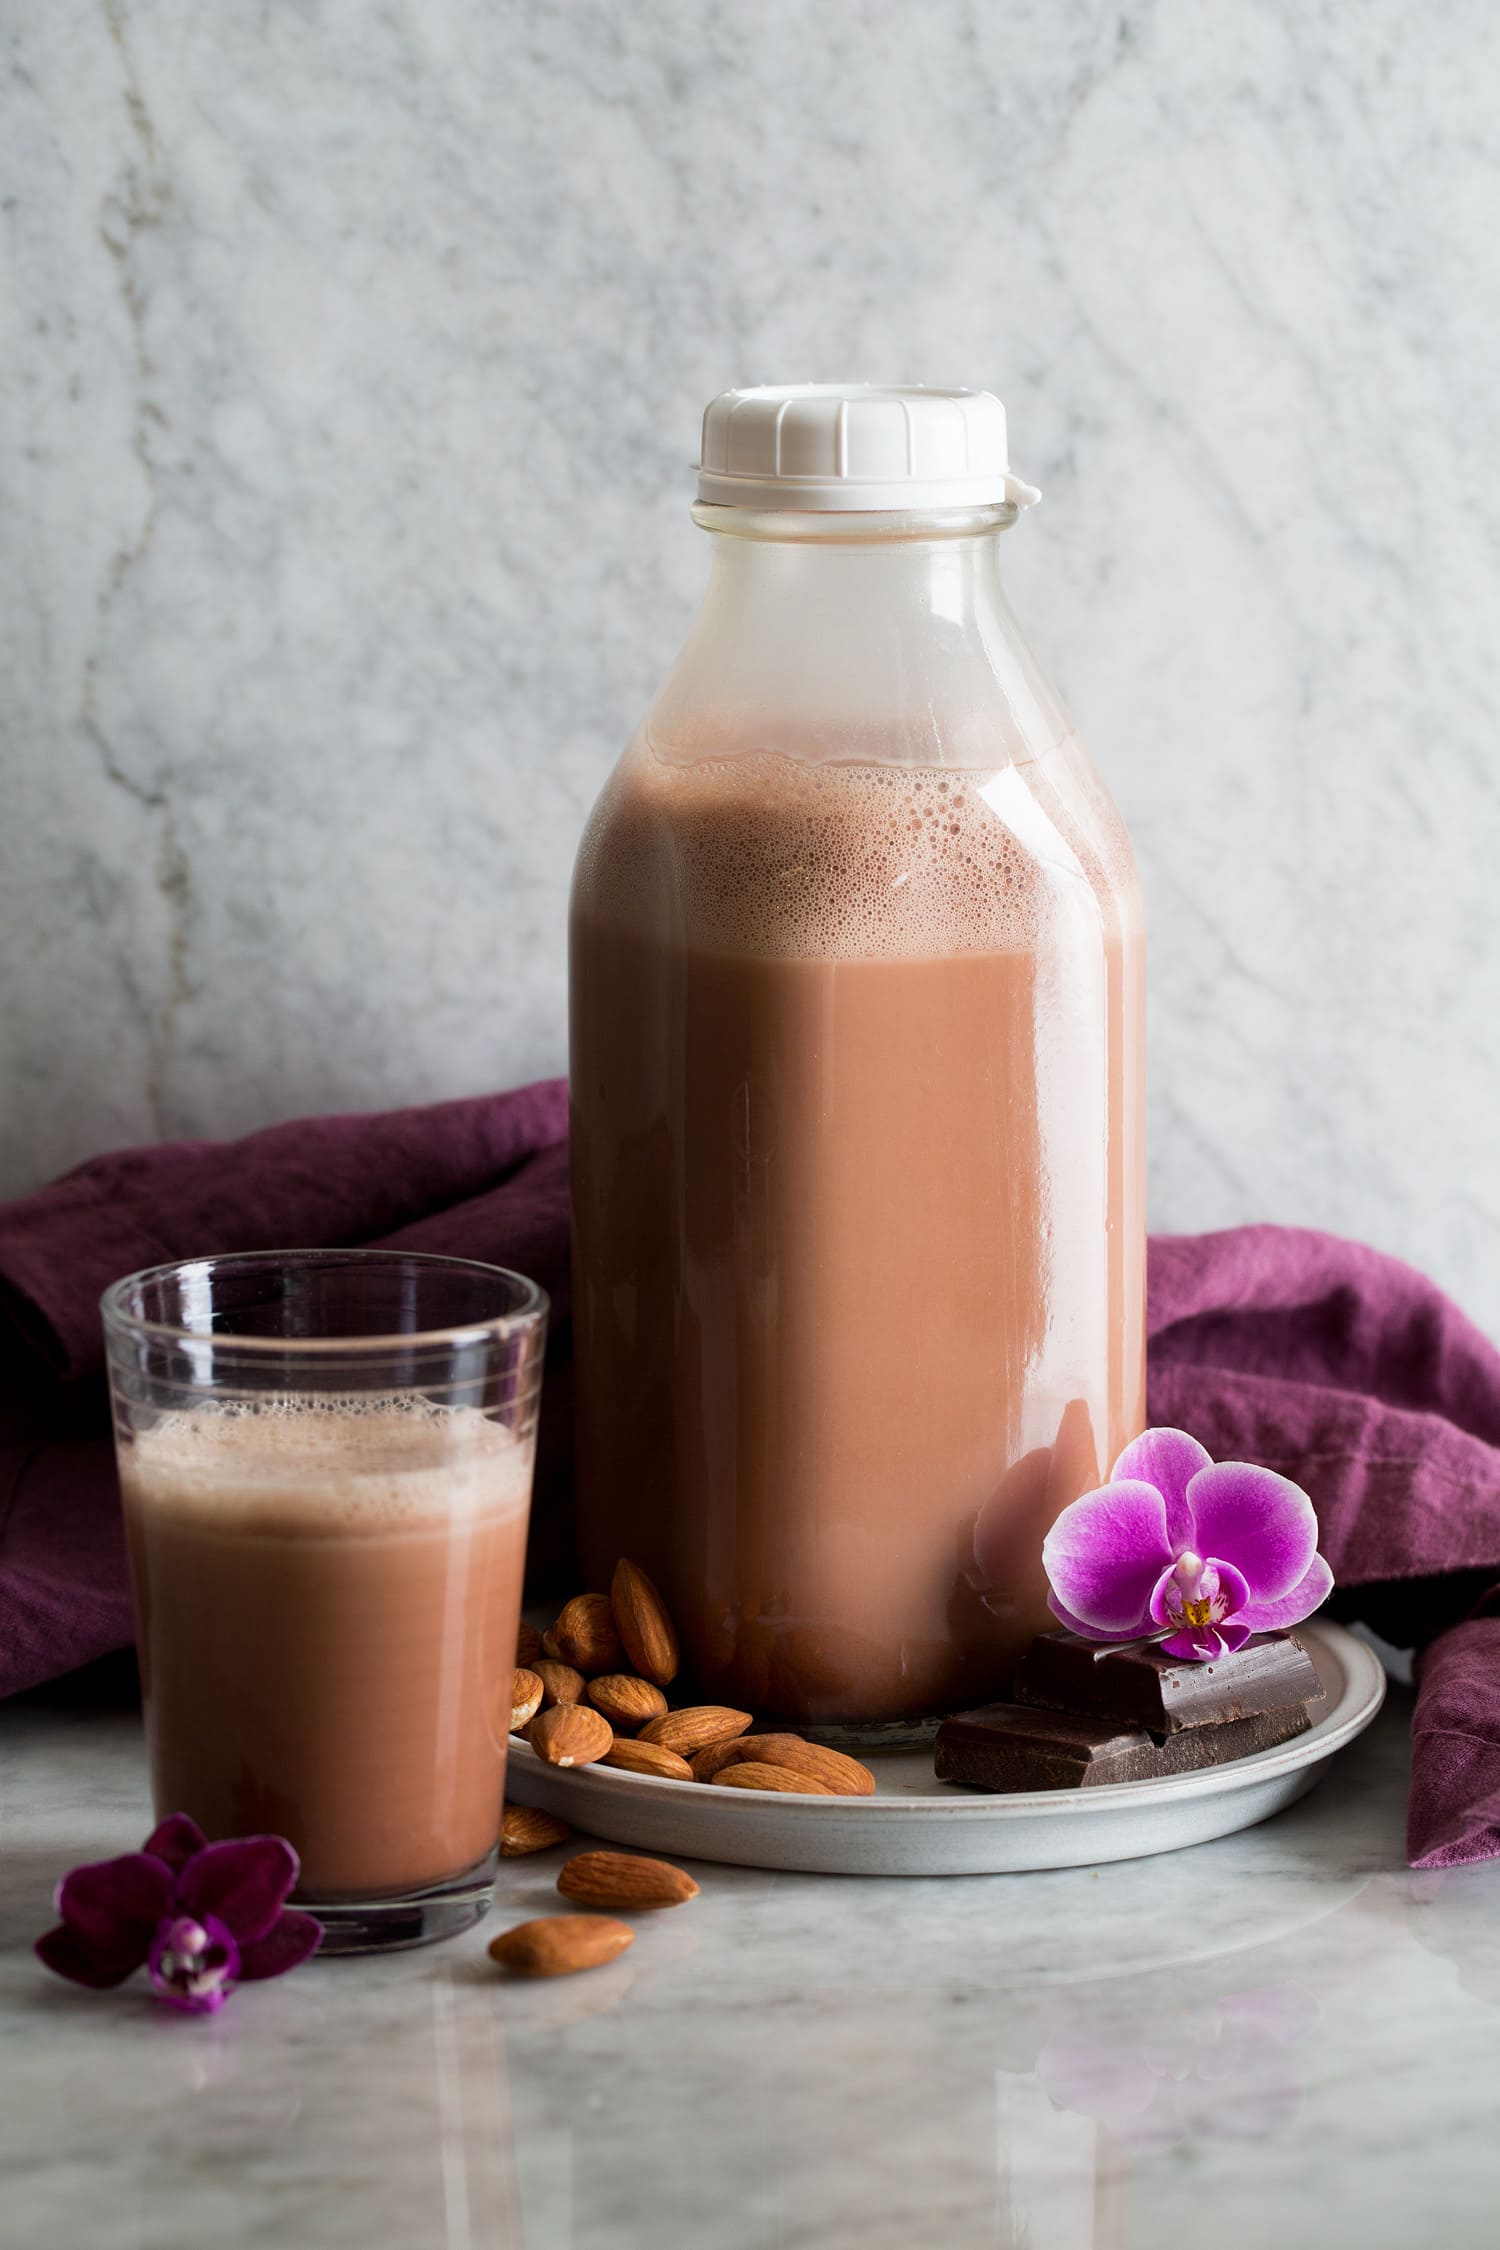 Homemade Chocolate Almond Milk. Shown in a glass milk jar with a cup of it to the side.